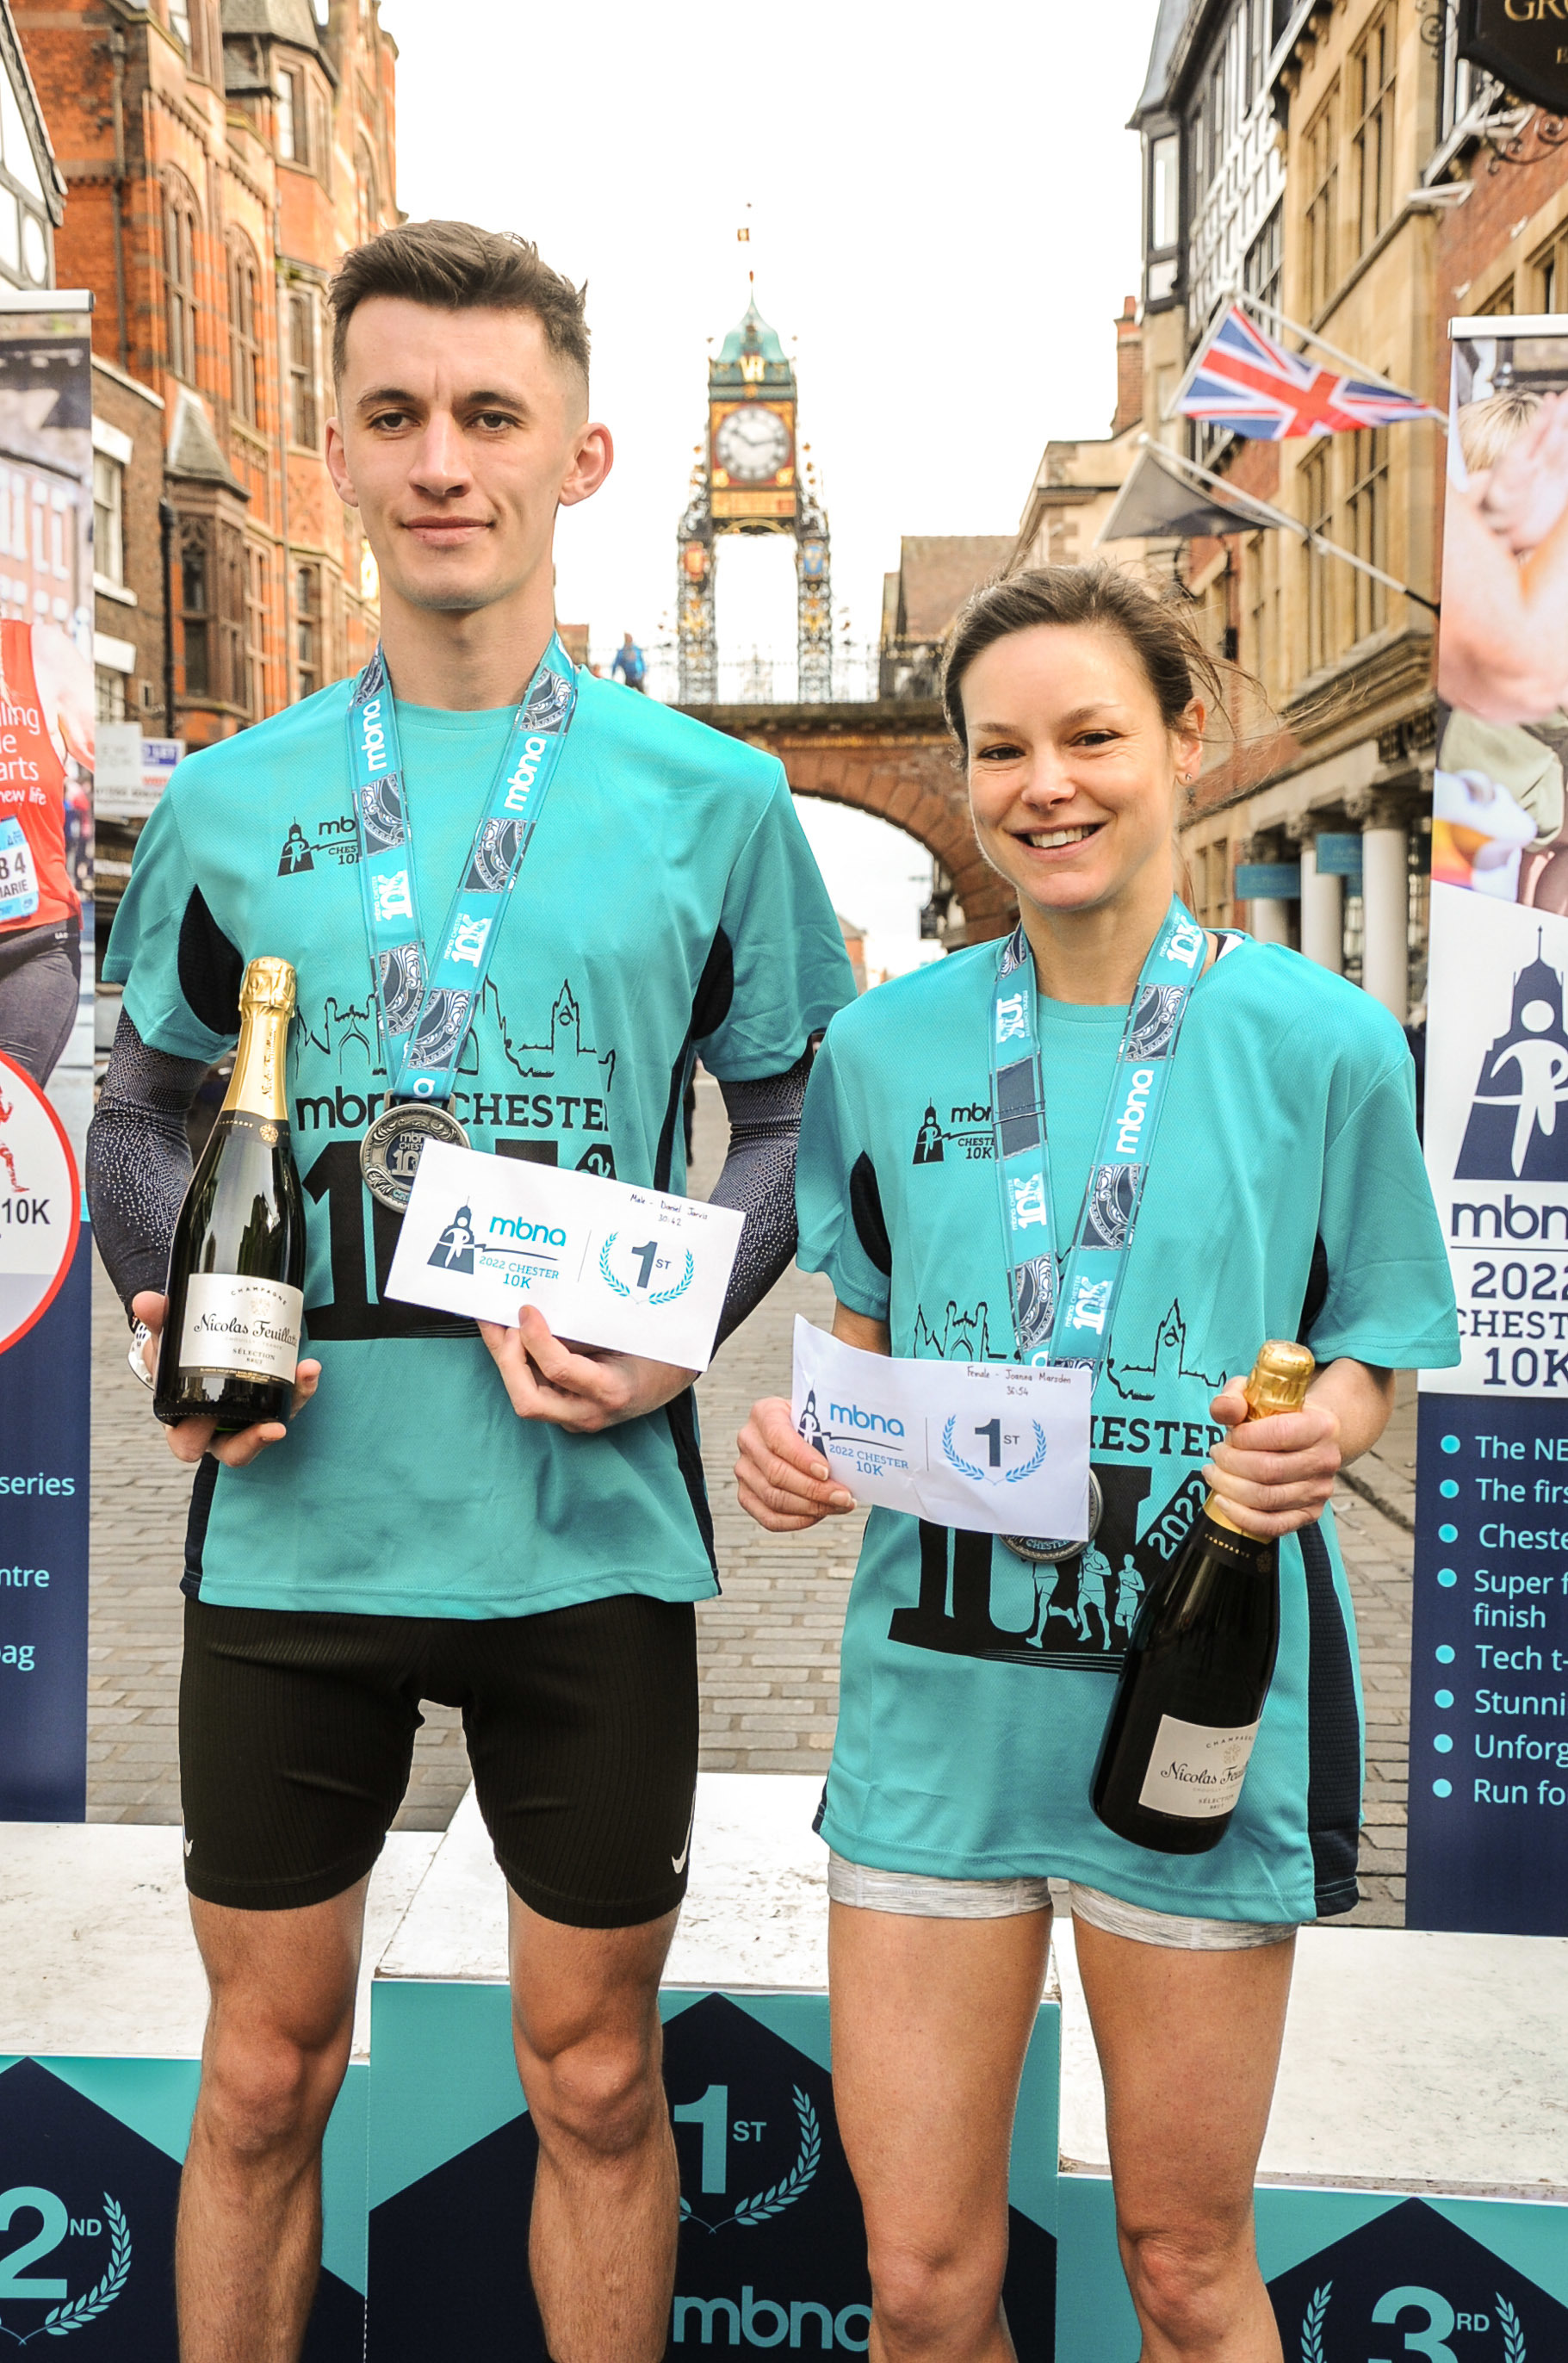 MBNA Chester 10K Race, Picture winners first man Daniel Jarvis from the Wirral and first Lady Joanna Marsden from Chester. SW13032022.